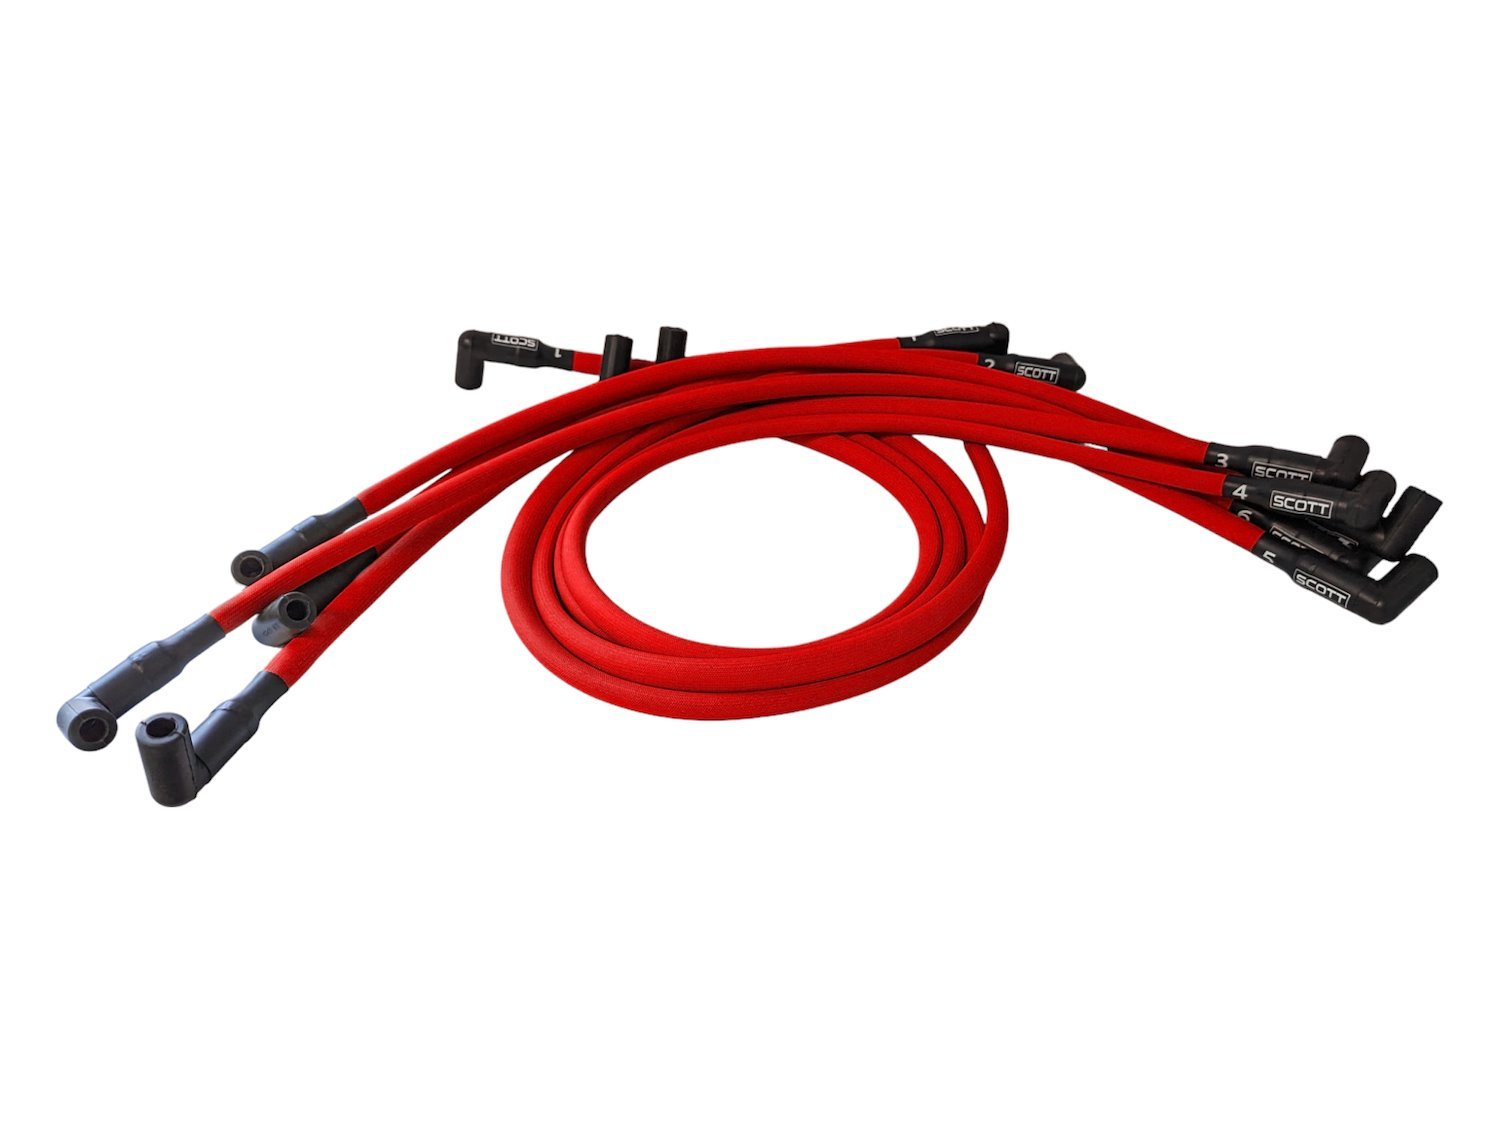 SPW300-PS-437-2 Super Mag Fiberglass-Oversleeved Spark Plug Wire Set for Small Block Chevy, Over & Under [Red]